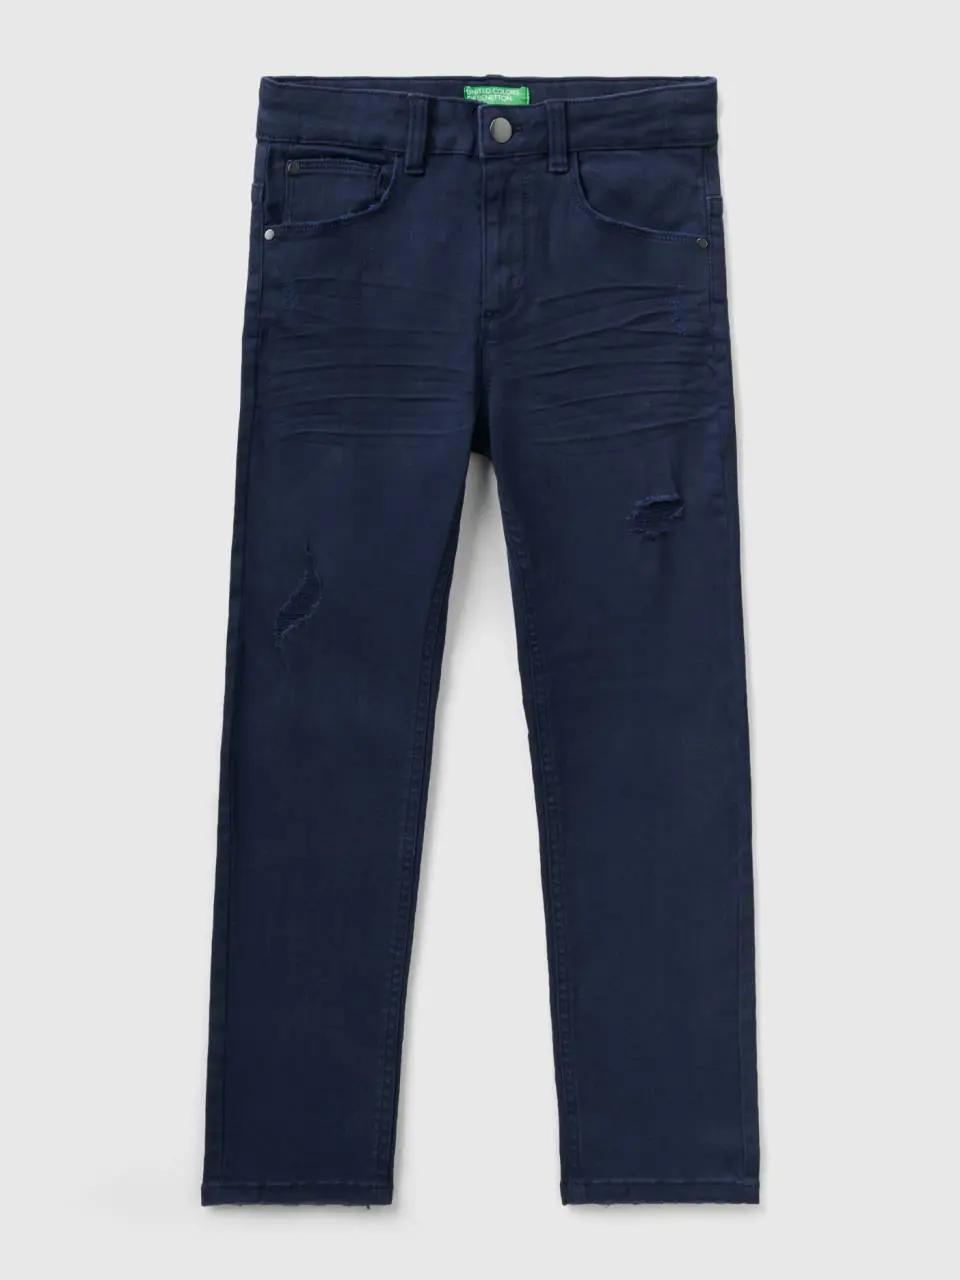 Benetton stretch jeans with tears. 1